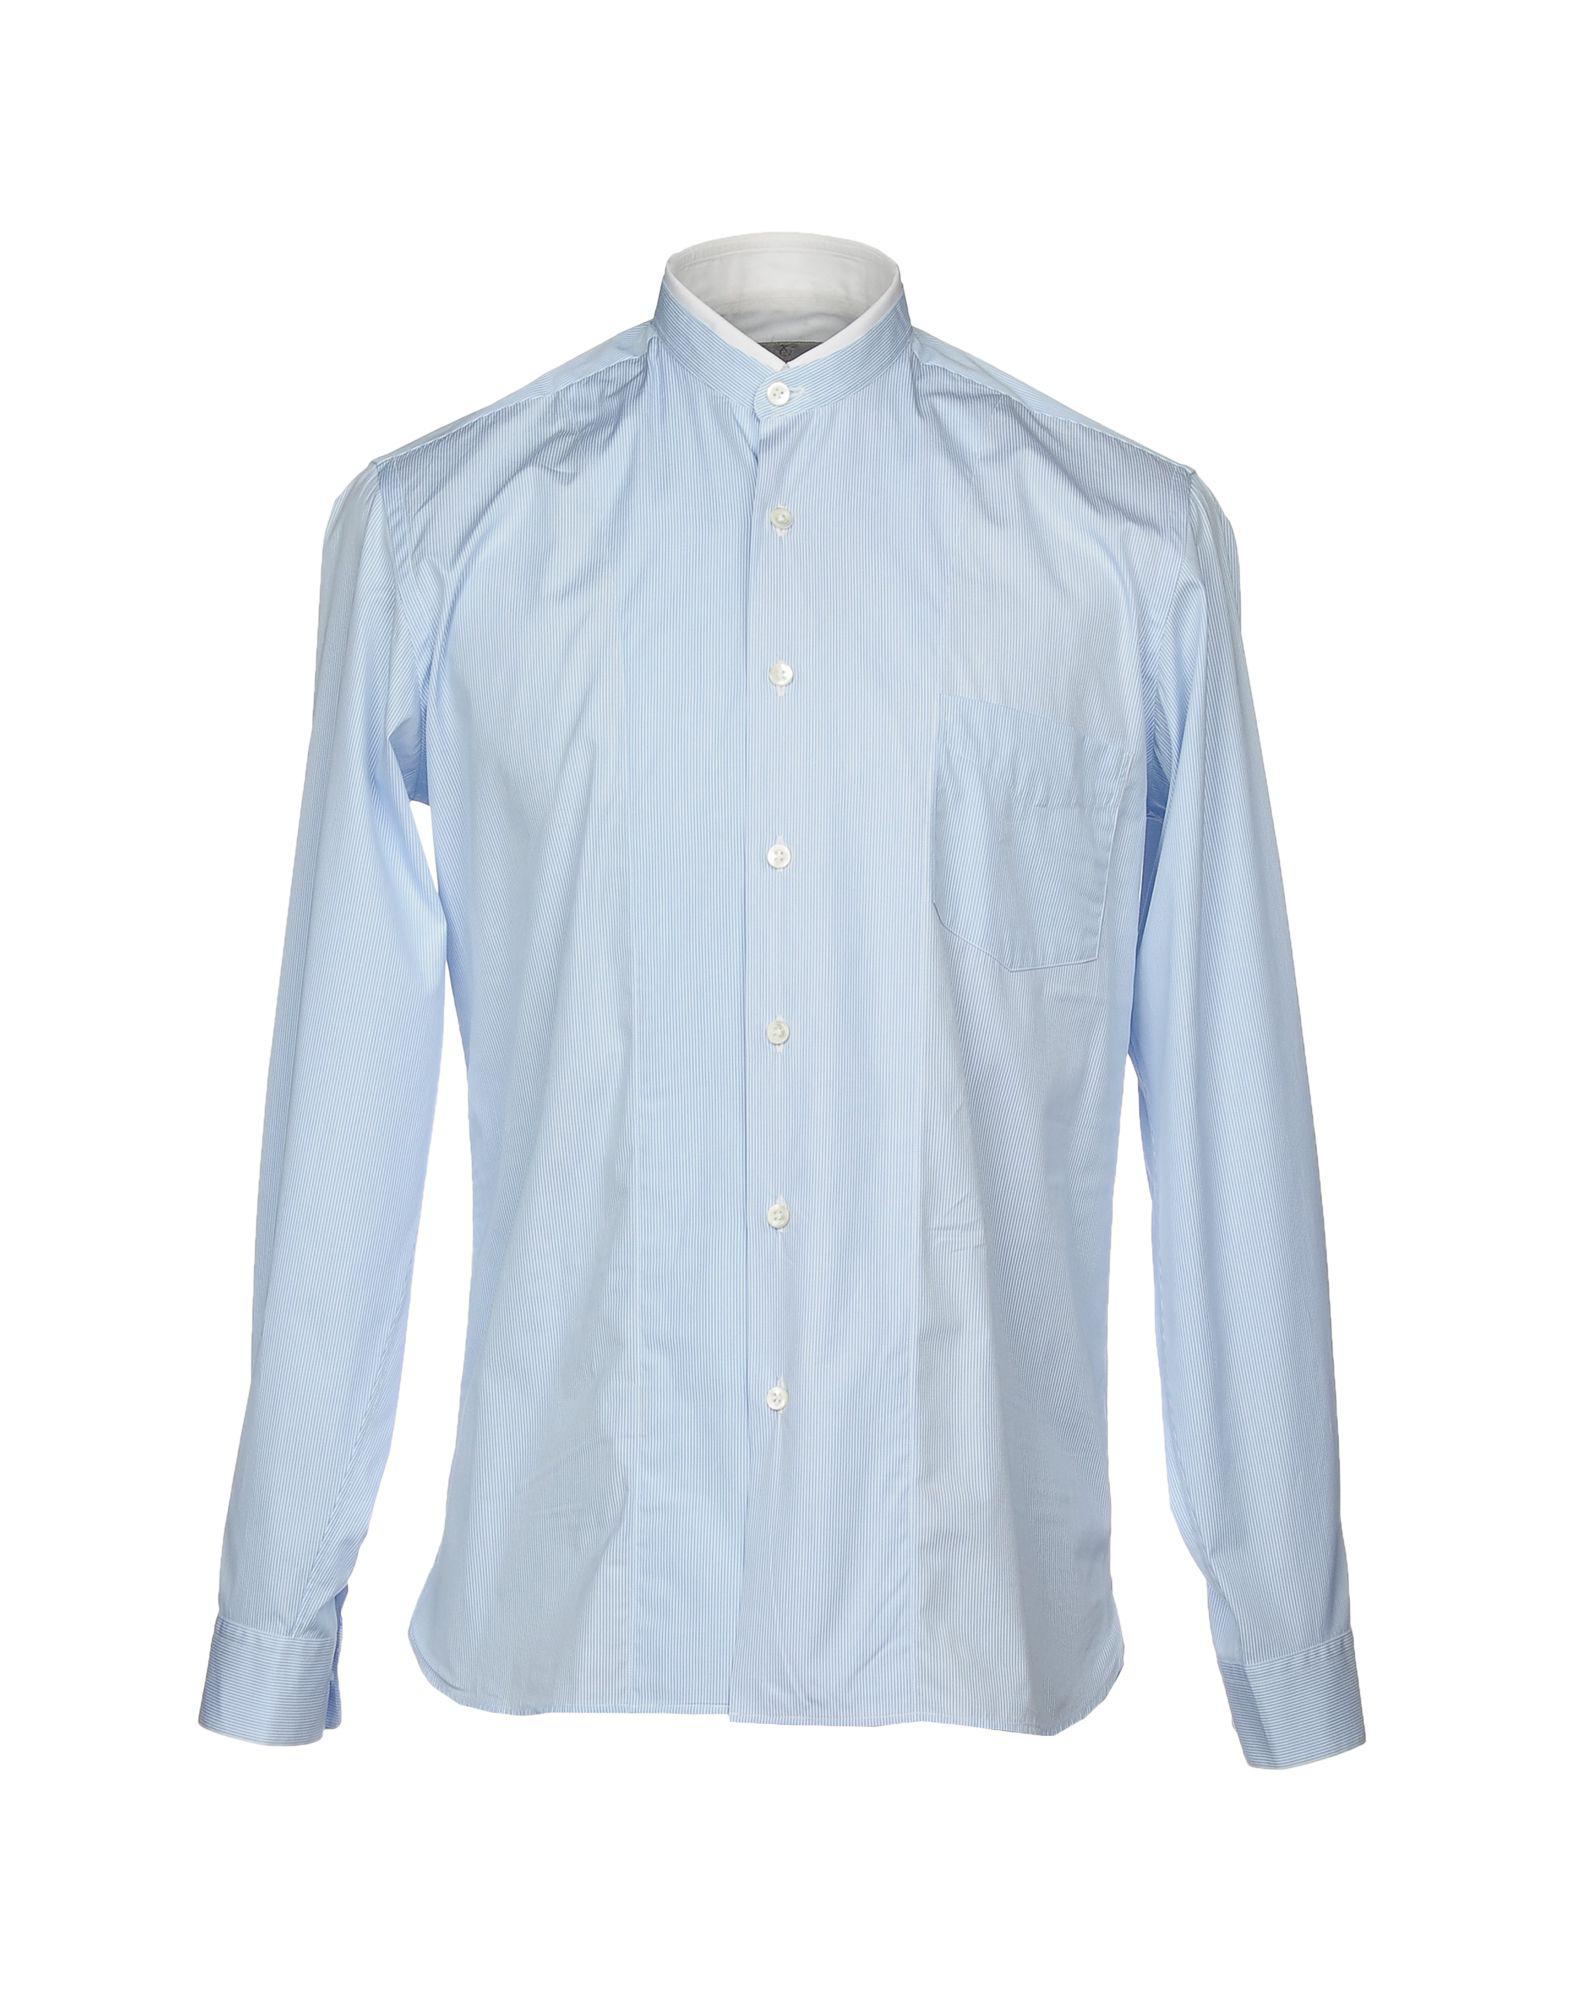 Canali Cotton Shirt in Sky Blue (Blue) for Men - Lyst